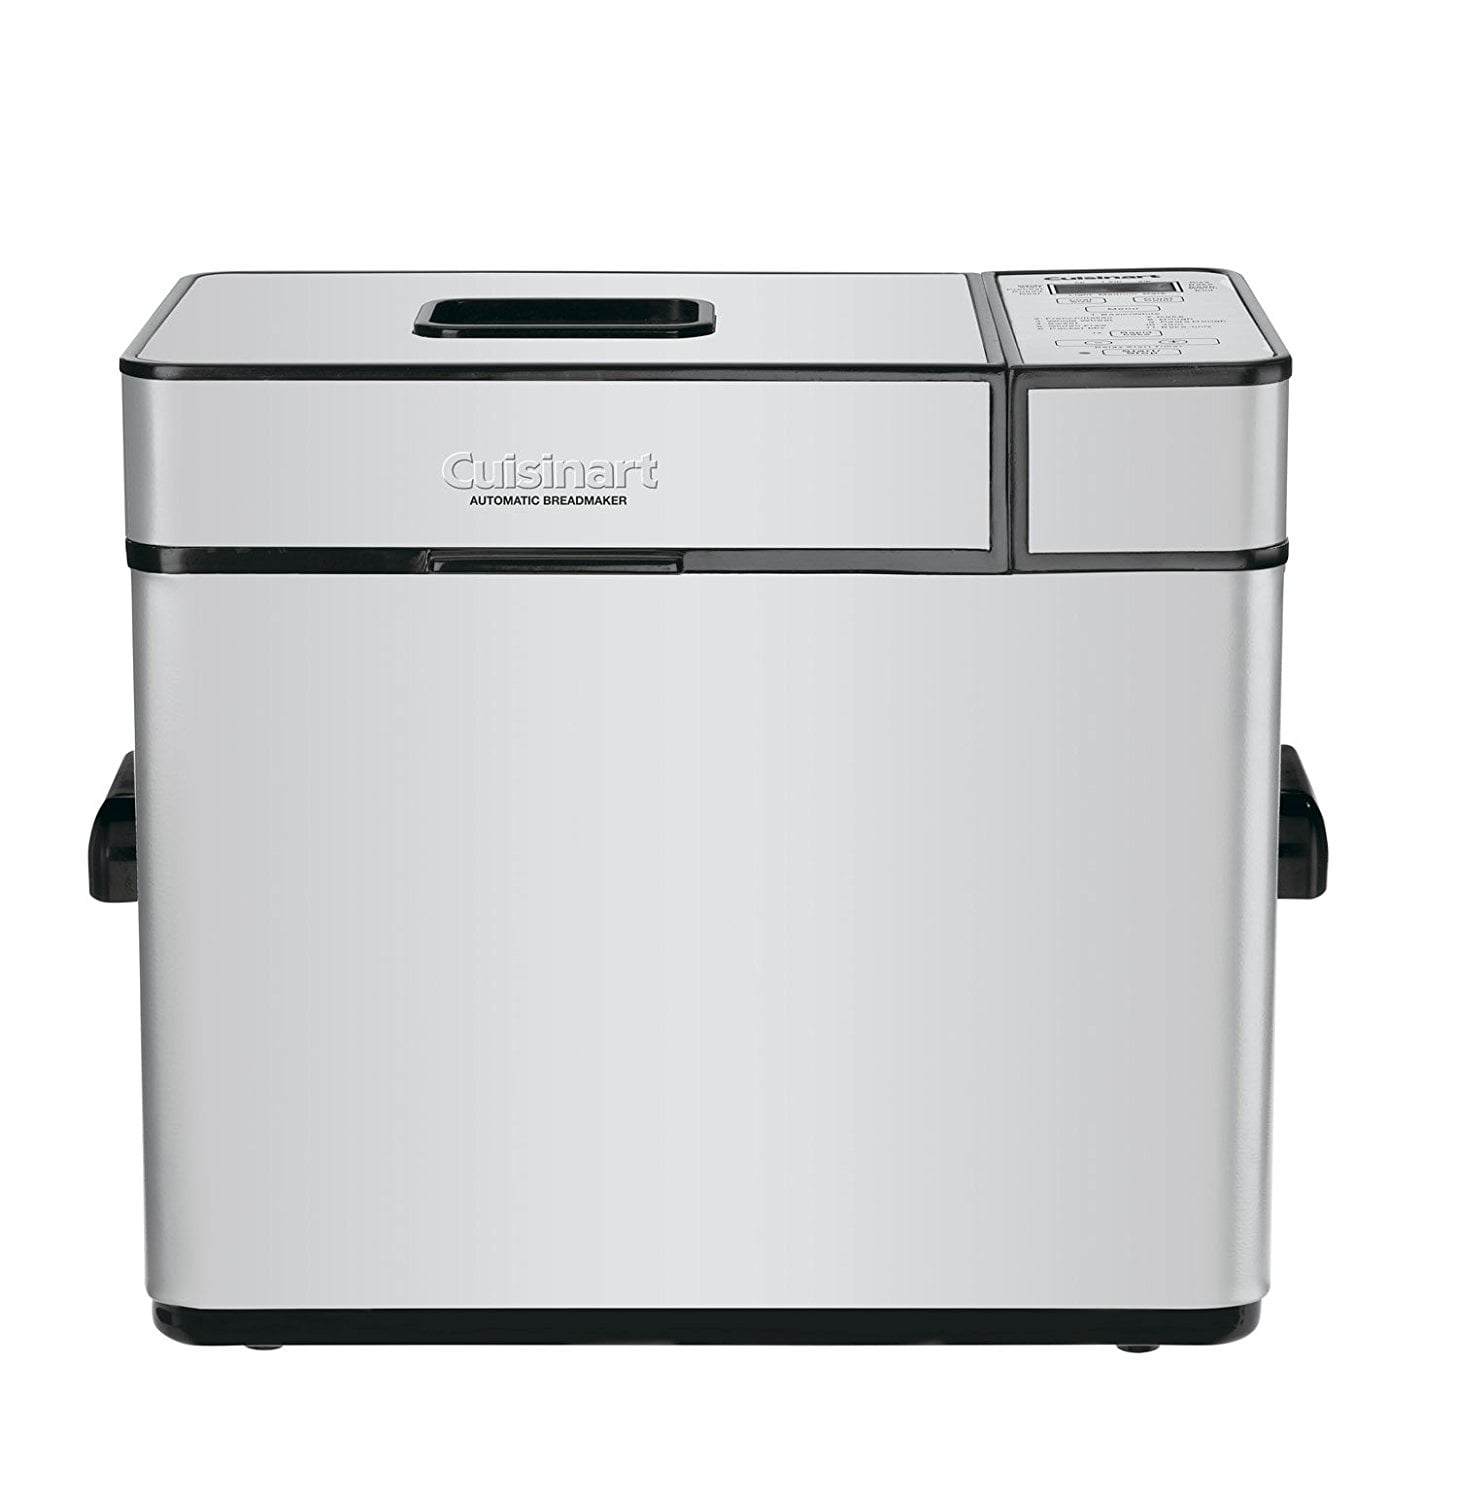 Cuisinart 2-lb Automatic Stainless Steel Breadmaker on QVC 